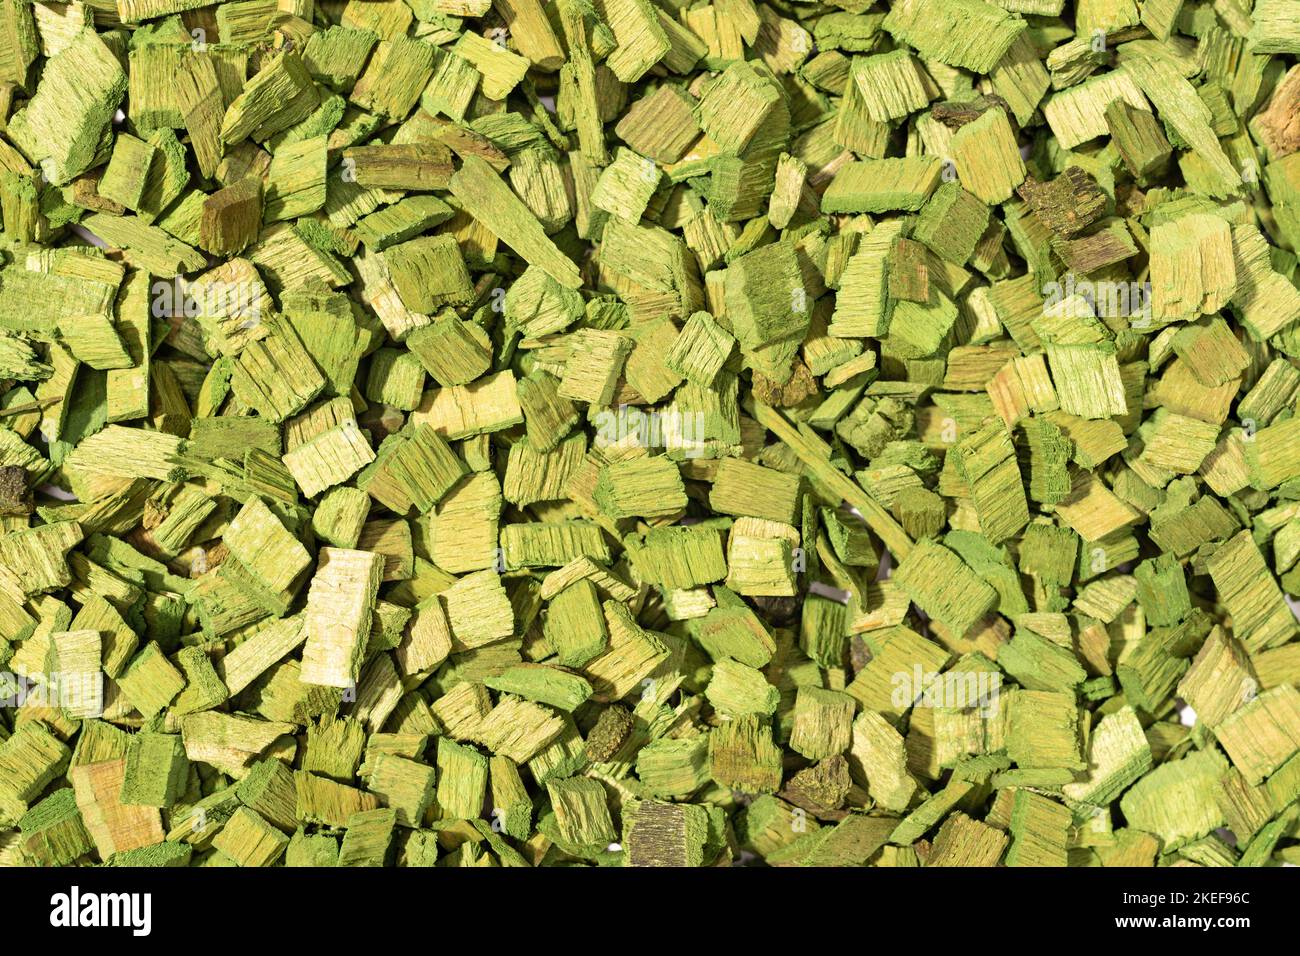 Green wooden chips background texture. Full frame Stock Photo